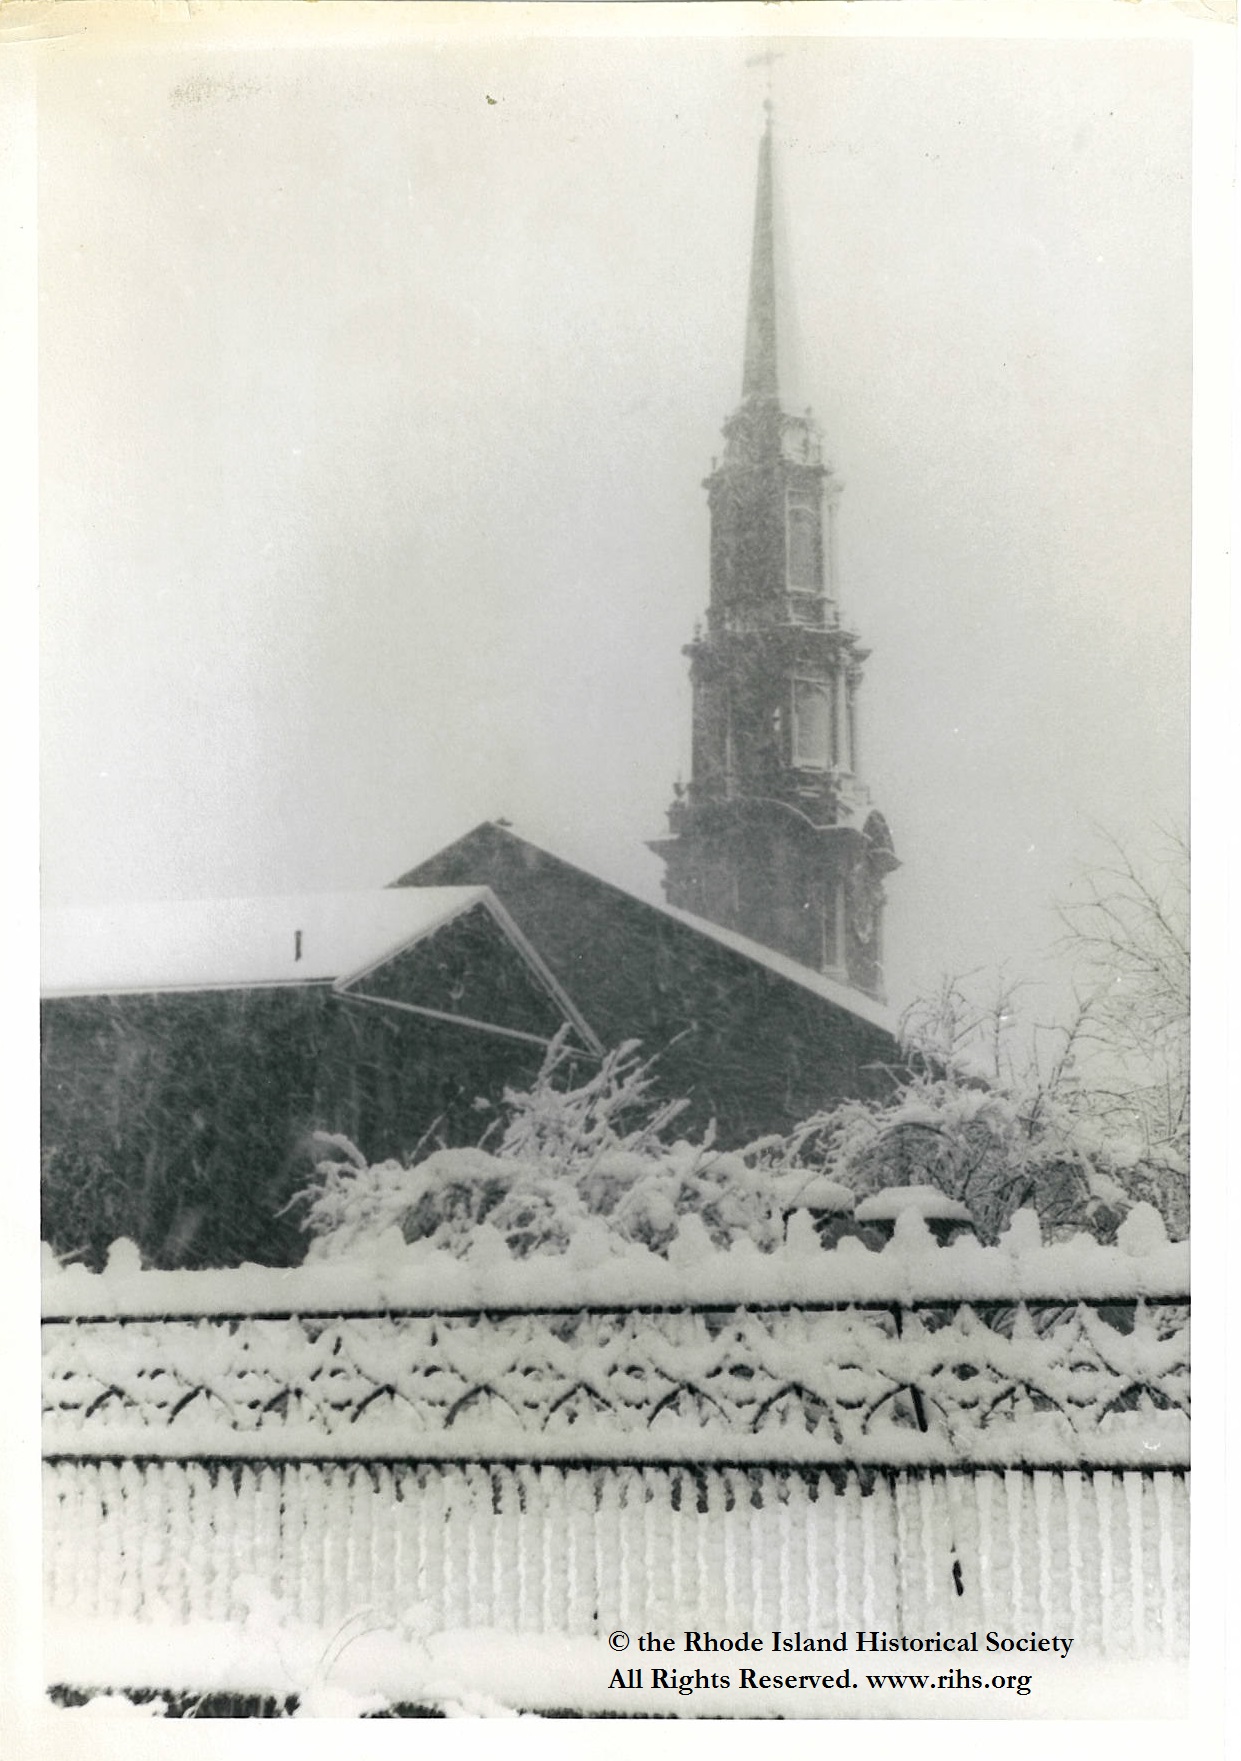 Estey, Charlotte (photographer). [View of the First Unitarian Church and Unitarian Hall from Benevolent Street, looking towards Benefit Street in the snow]. Providence, Rhode Island. 1945-1955. Photograph: Silver gelatin. Mary Elizabeth Robinson Research Center, G Lot 144, Charlotte Estey Collection.